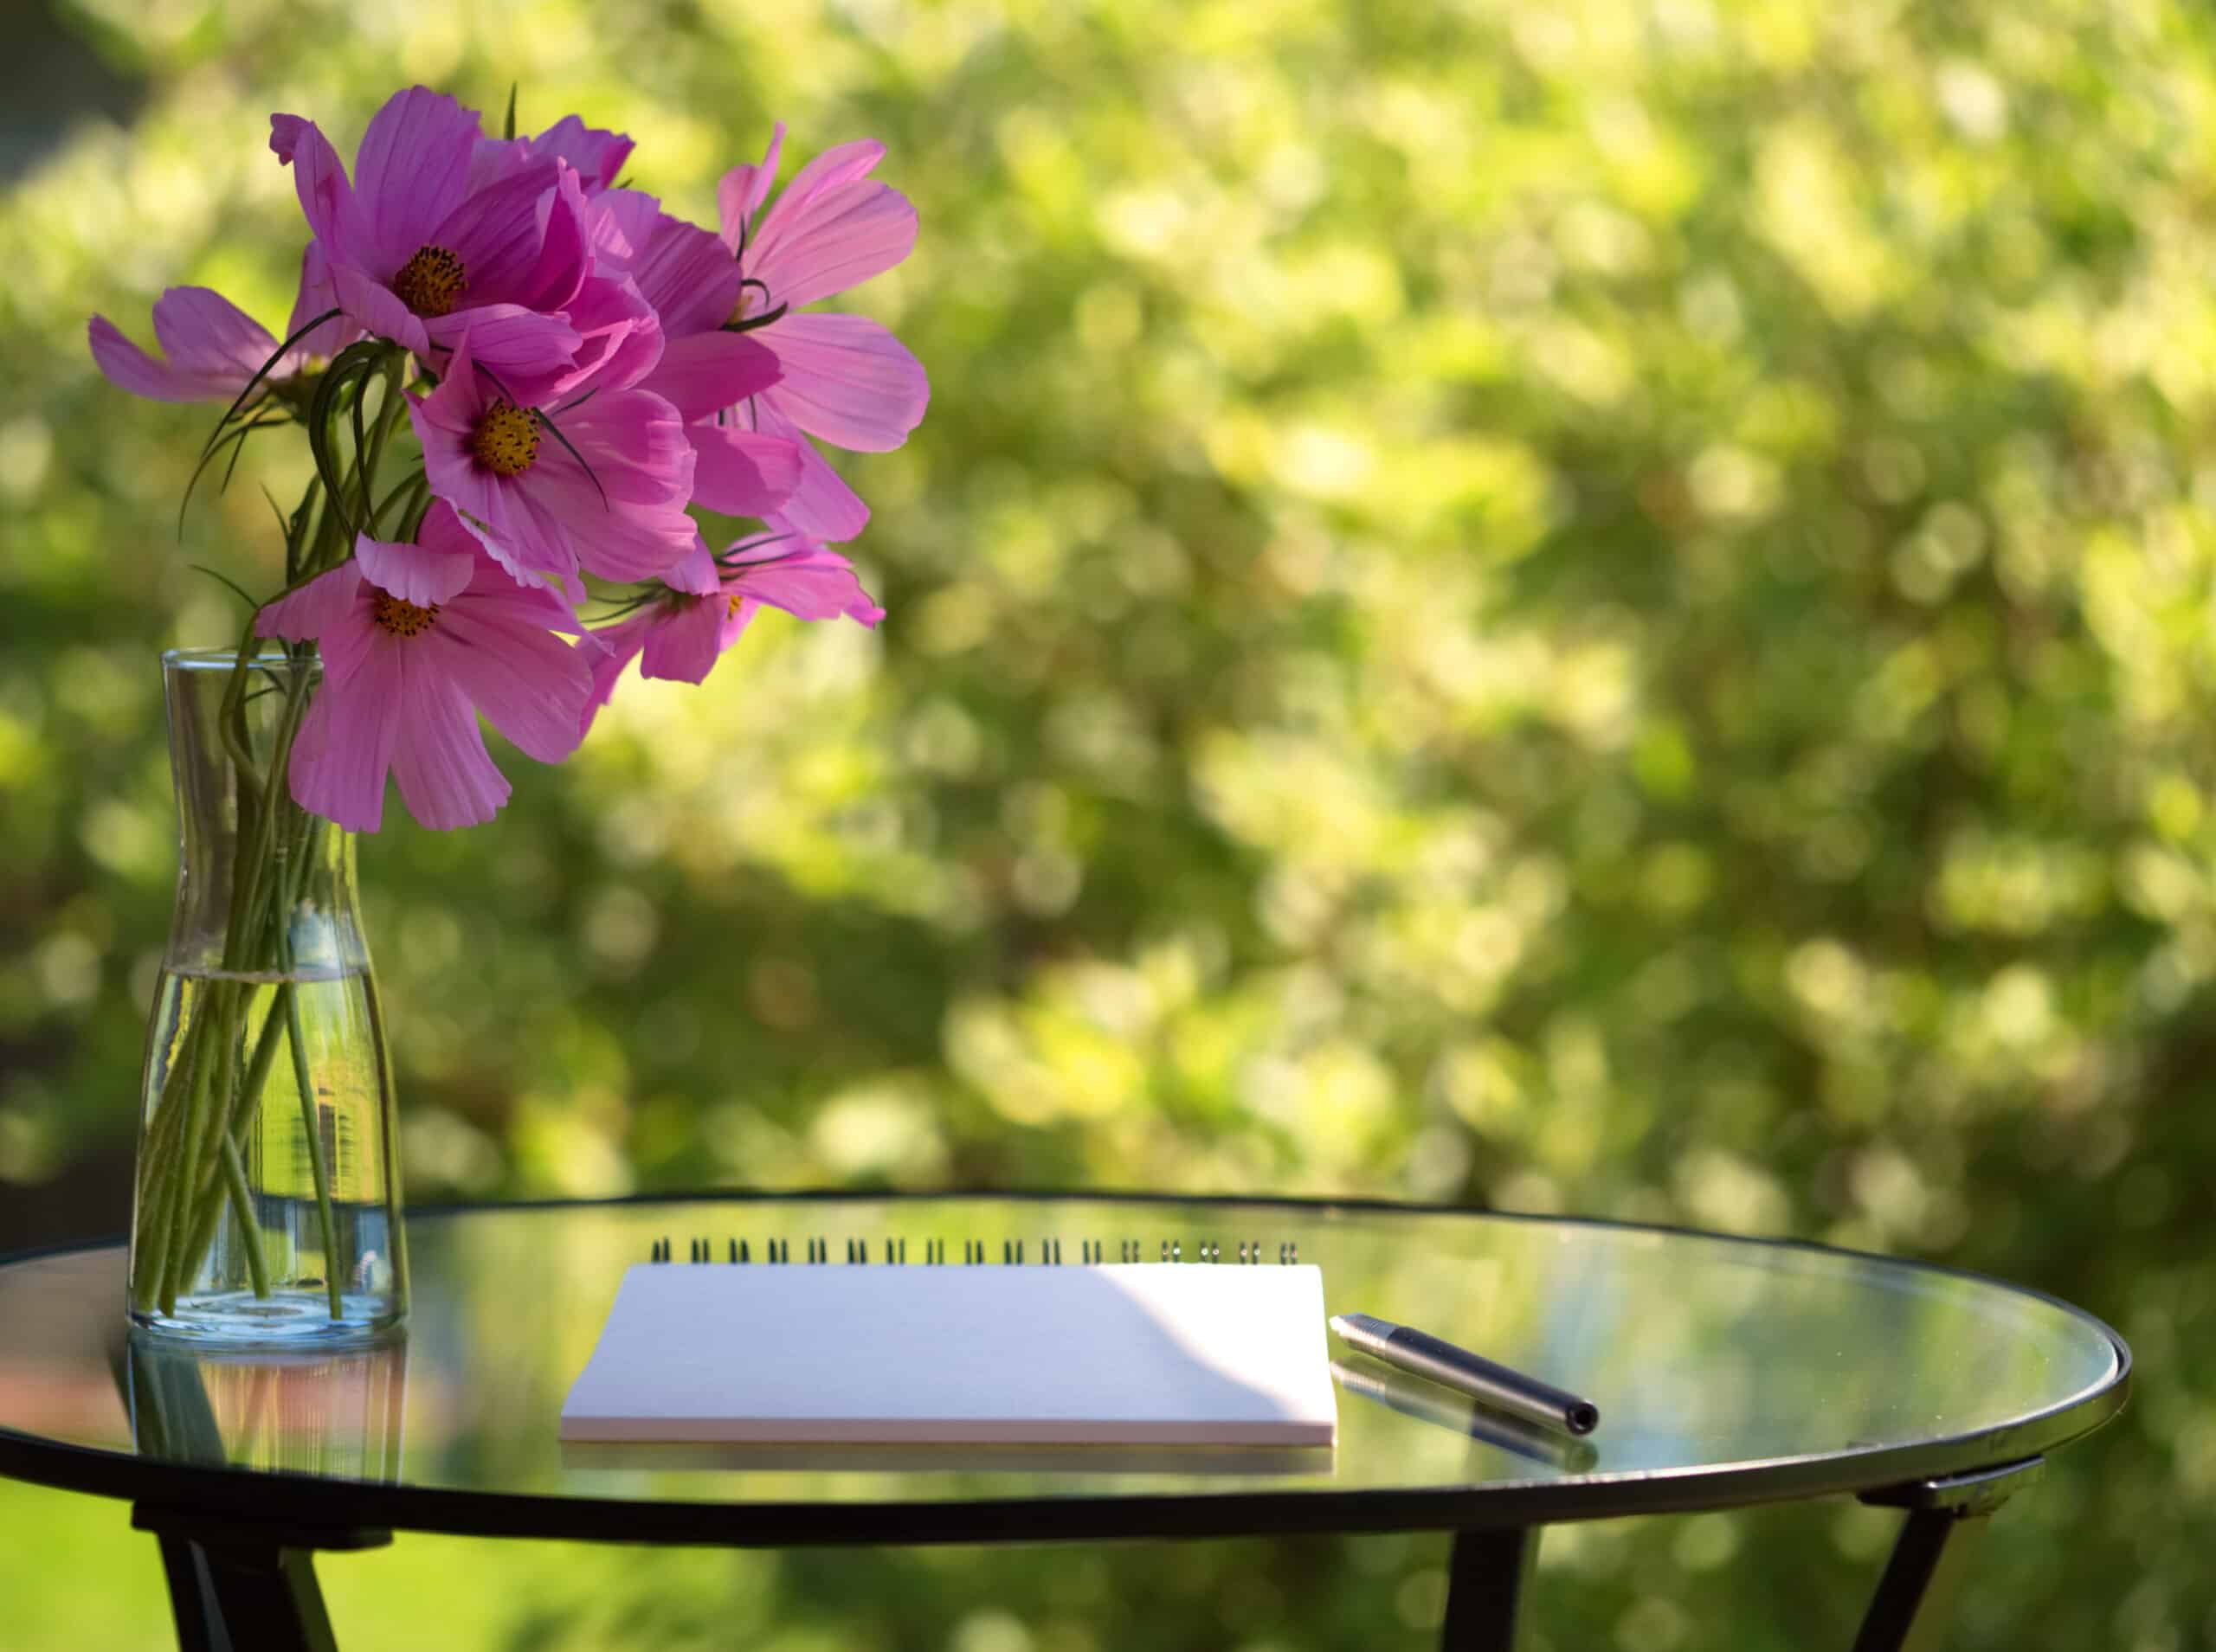 bouquet of cosmo flowers, notepad on table in summer green garden with sunlight